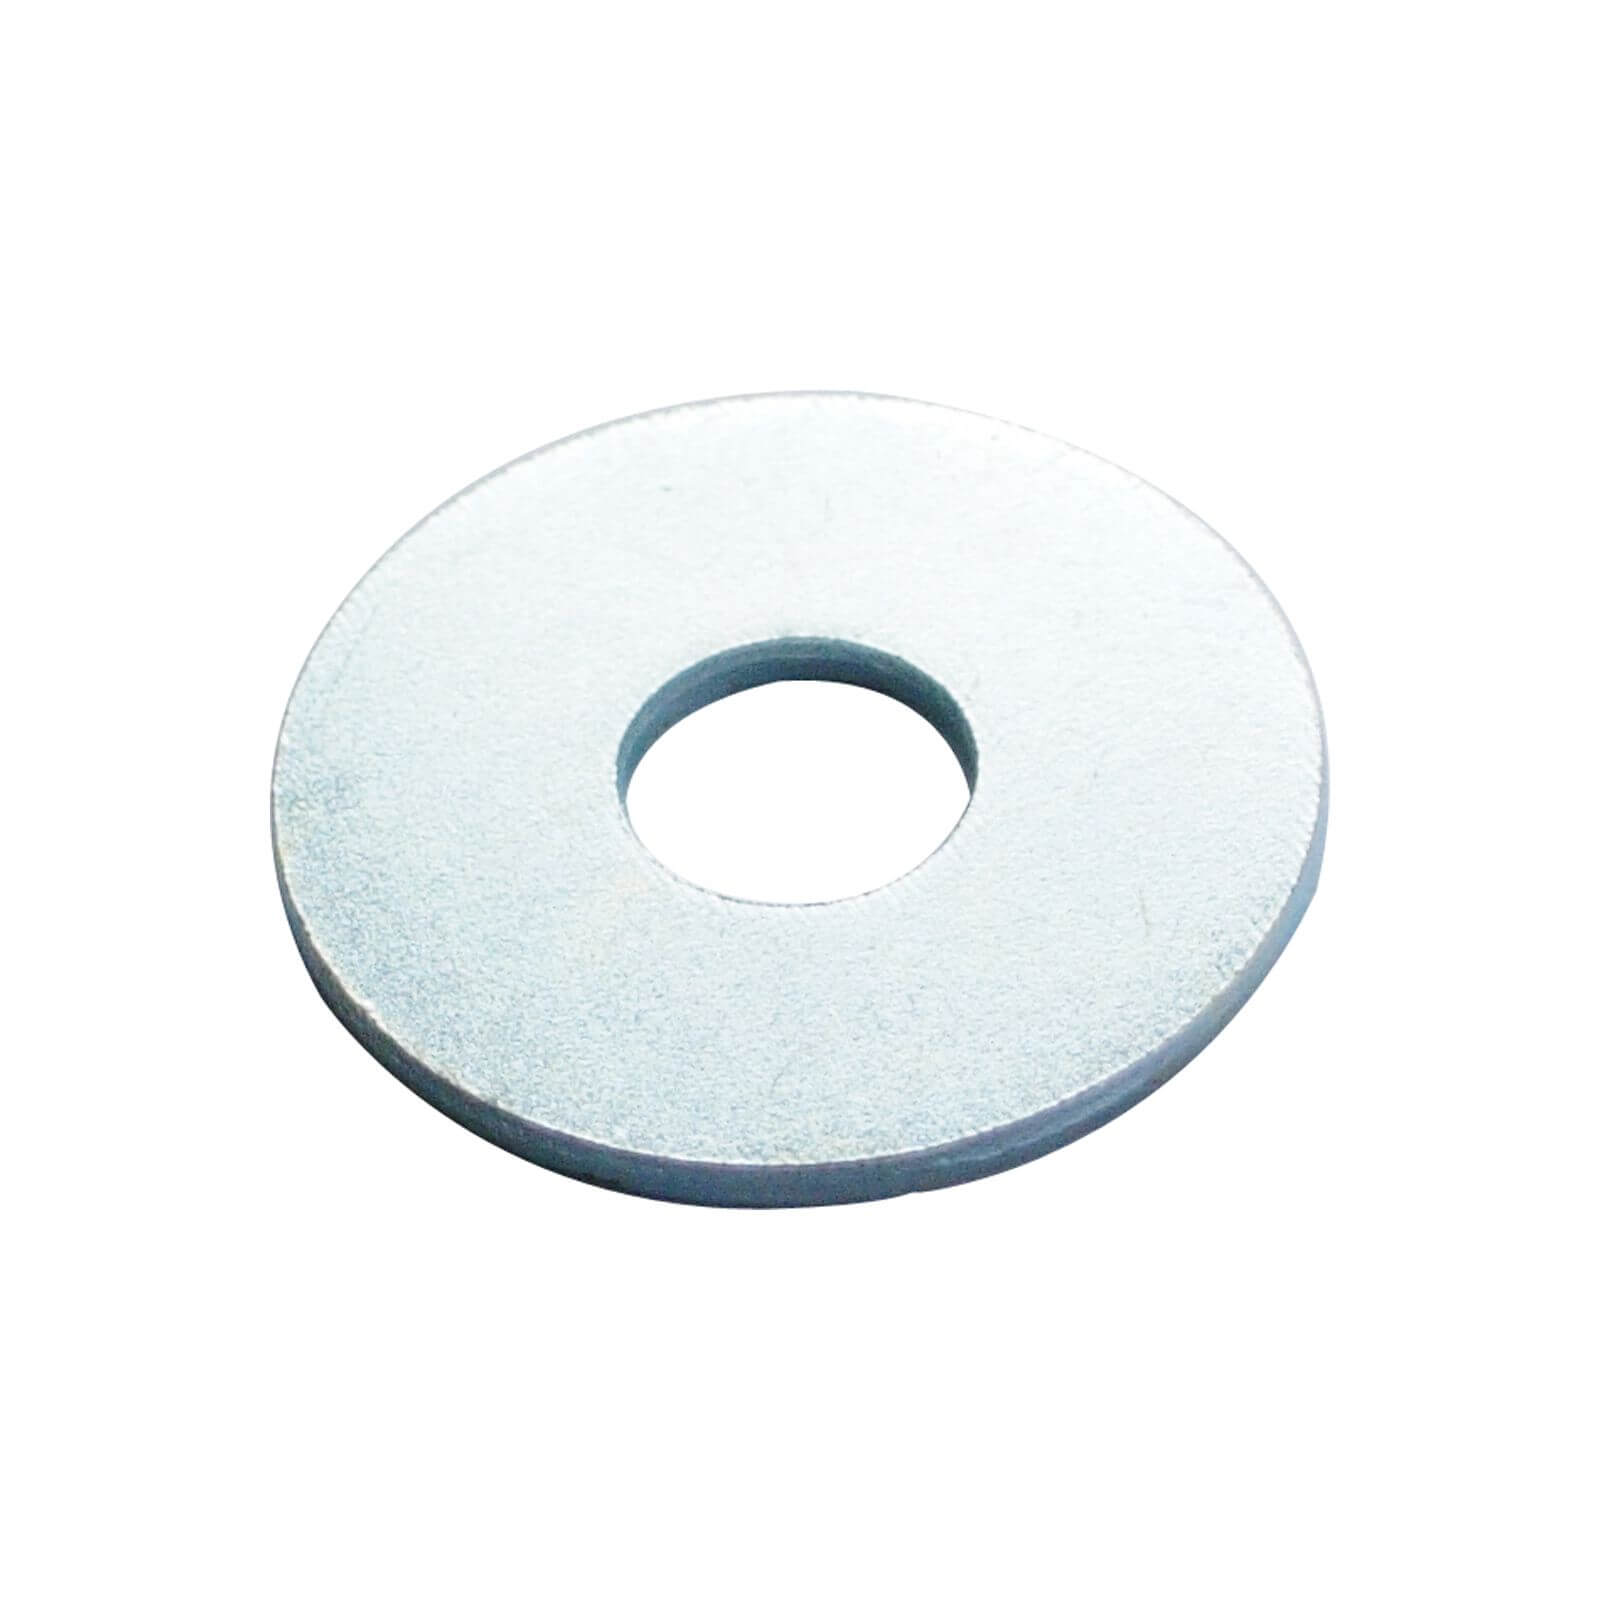 Repair Washer - Bright Zinc Plated - M4 19mm - 10 Pack